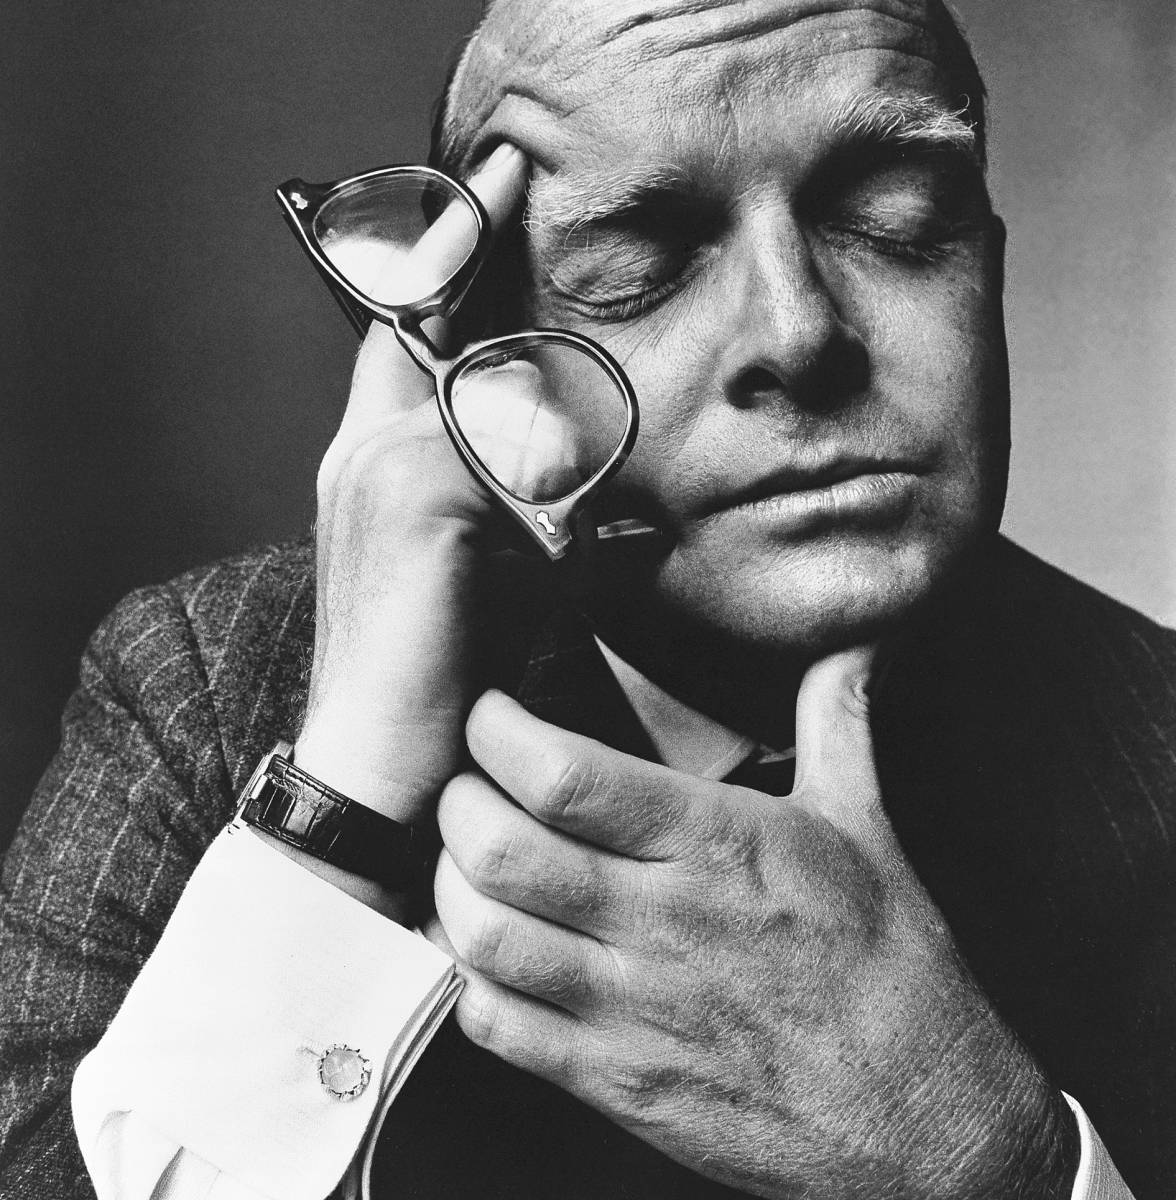 TRUMAN CAPOTE, ΤΡΟΥΜΑΝ ΚΑΠΟΤΕ, ΣΥΓΓΡΑΦΕΑΣ, Black and White Ball, Breakfast at Tiffany's, Εν Ψυχρό, In Cold Blood, nikosonline.gr 